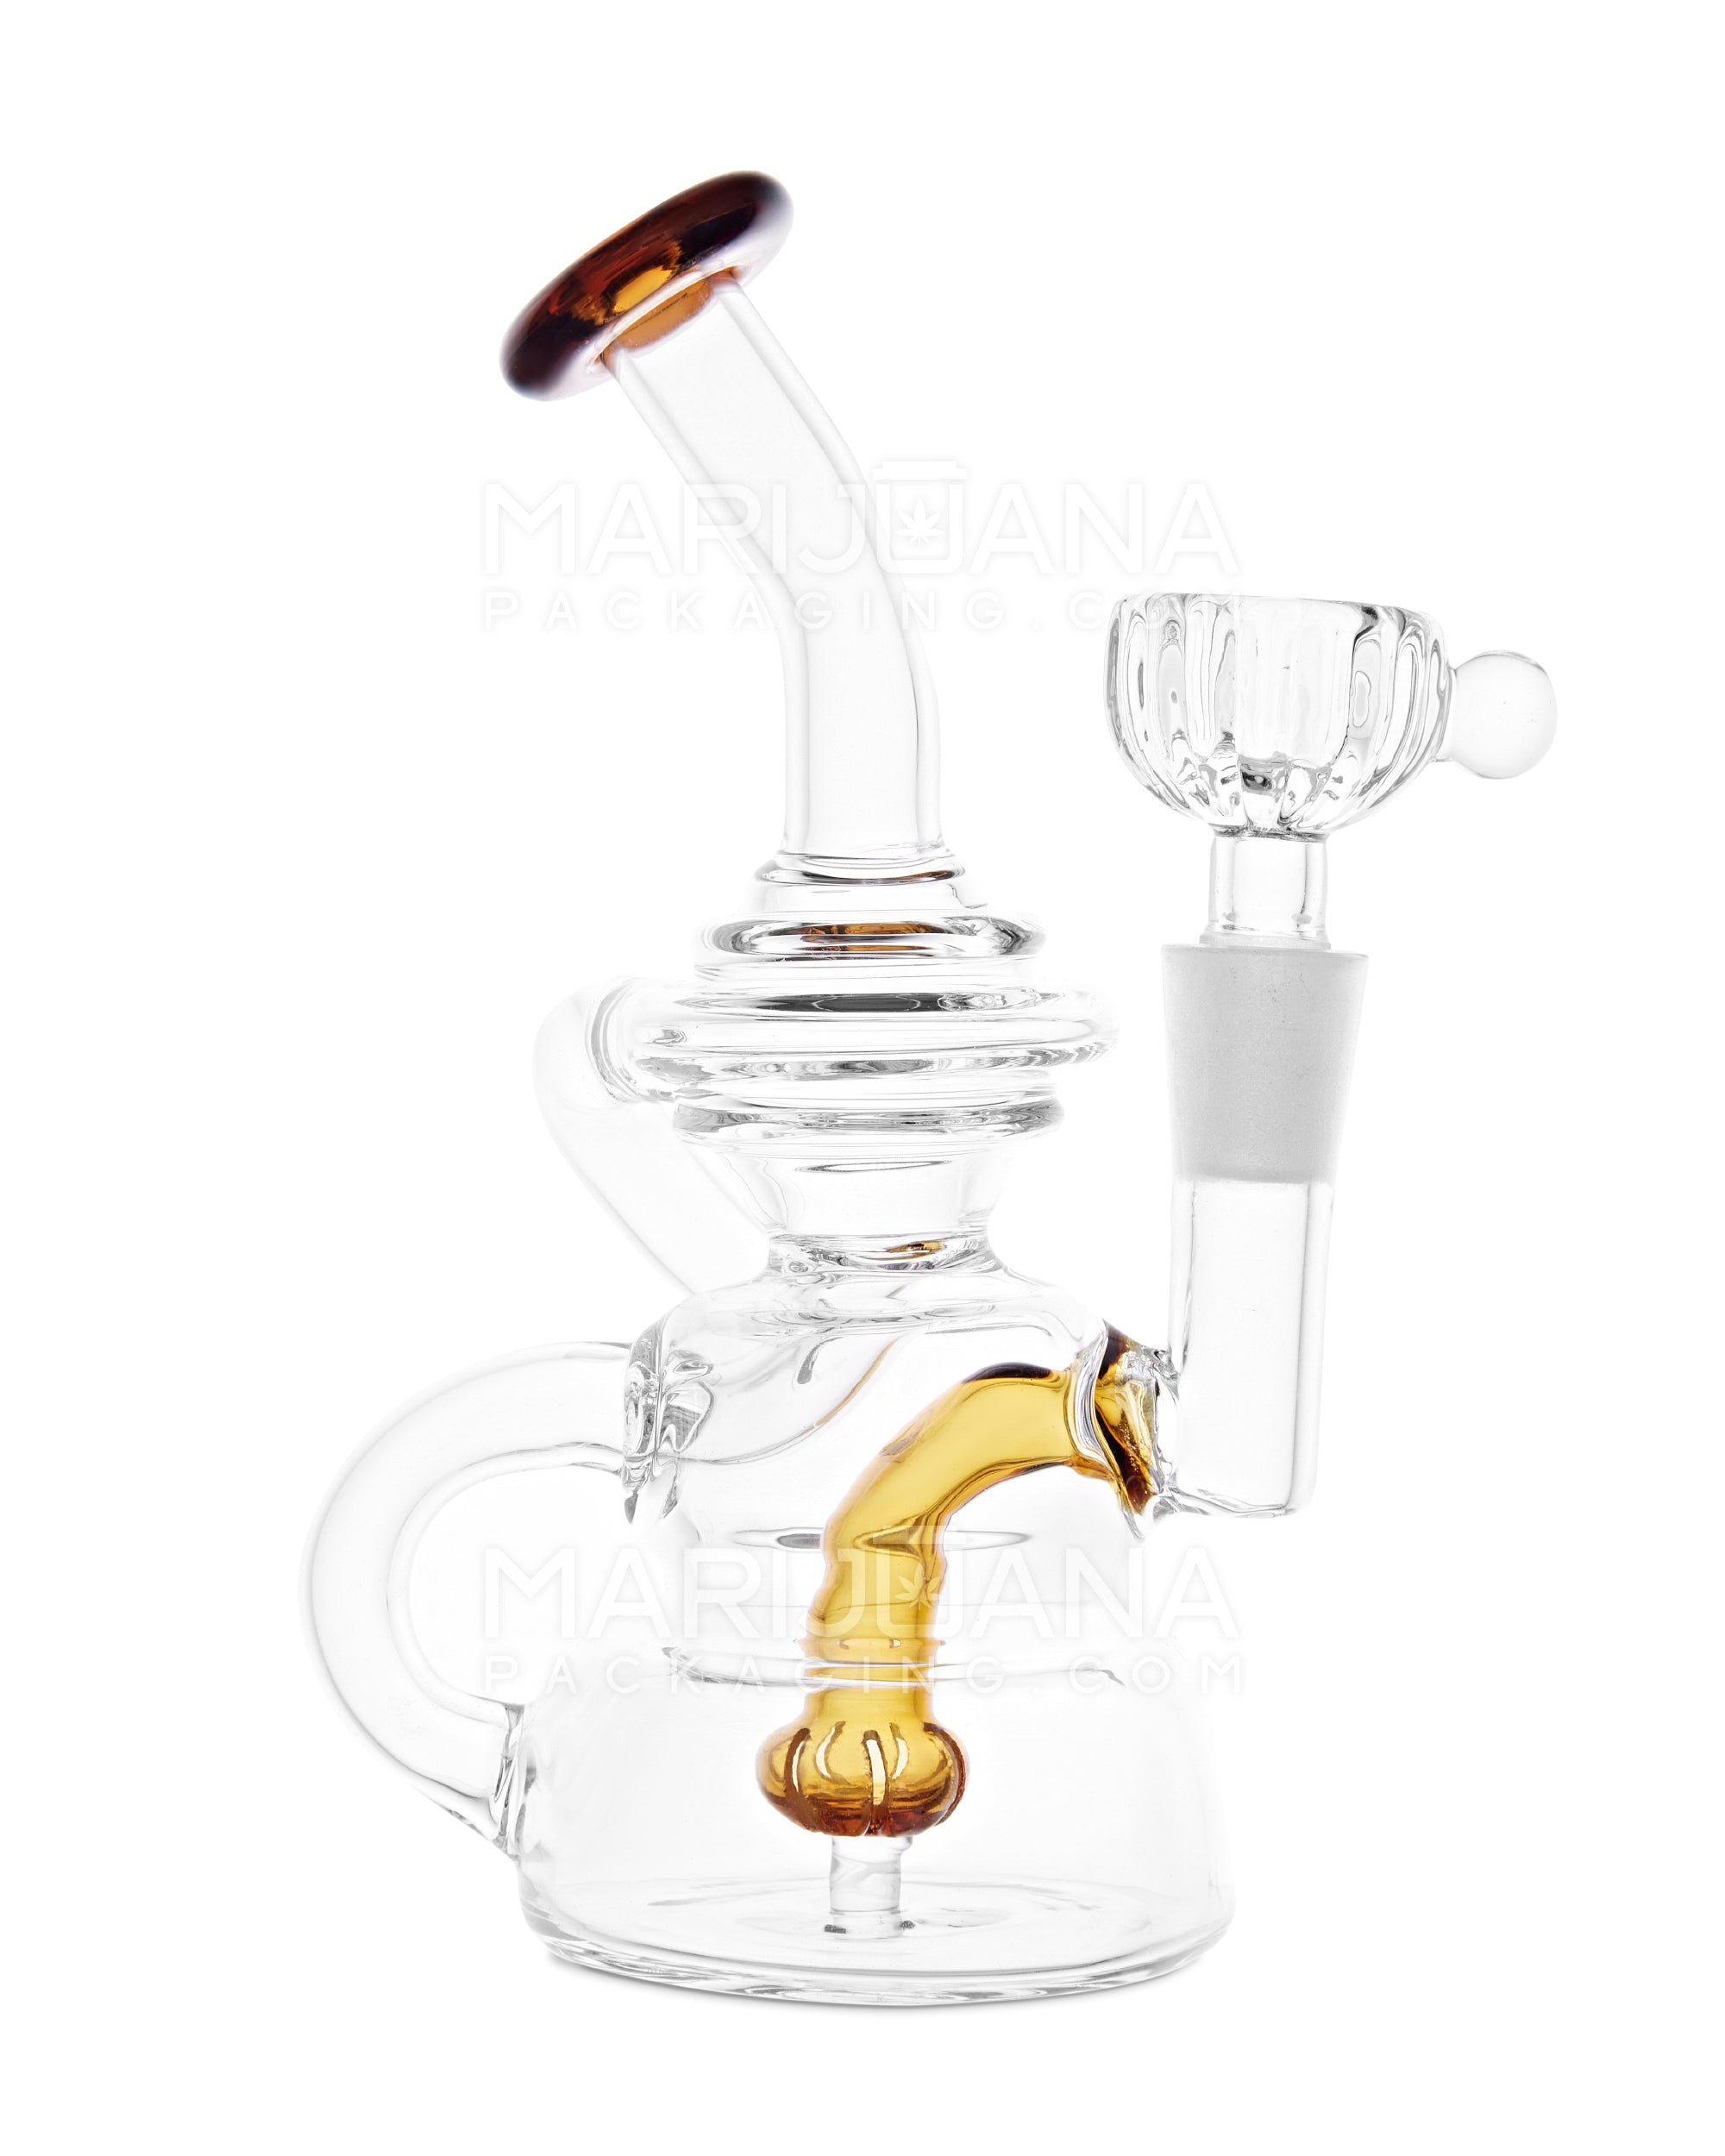 USA Glass | Bent Neck Single Uptake Mini Recycler Water Pipe w/ Orb Perc | 5.5in Tall - 10mm Bowl - Amber